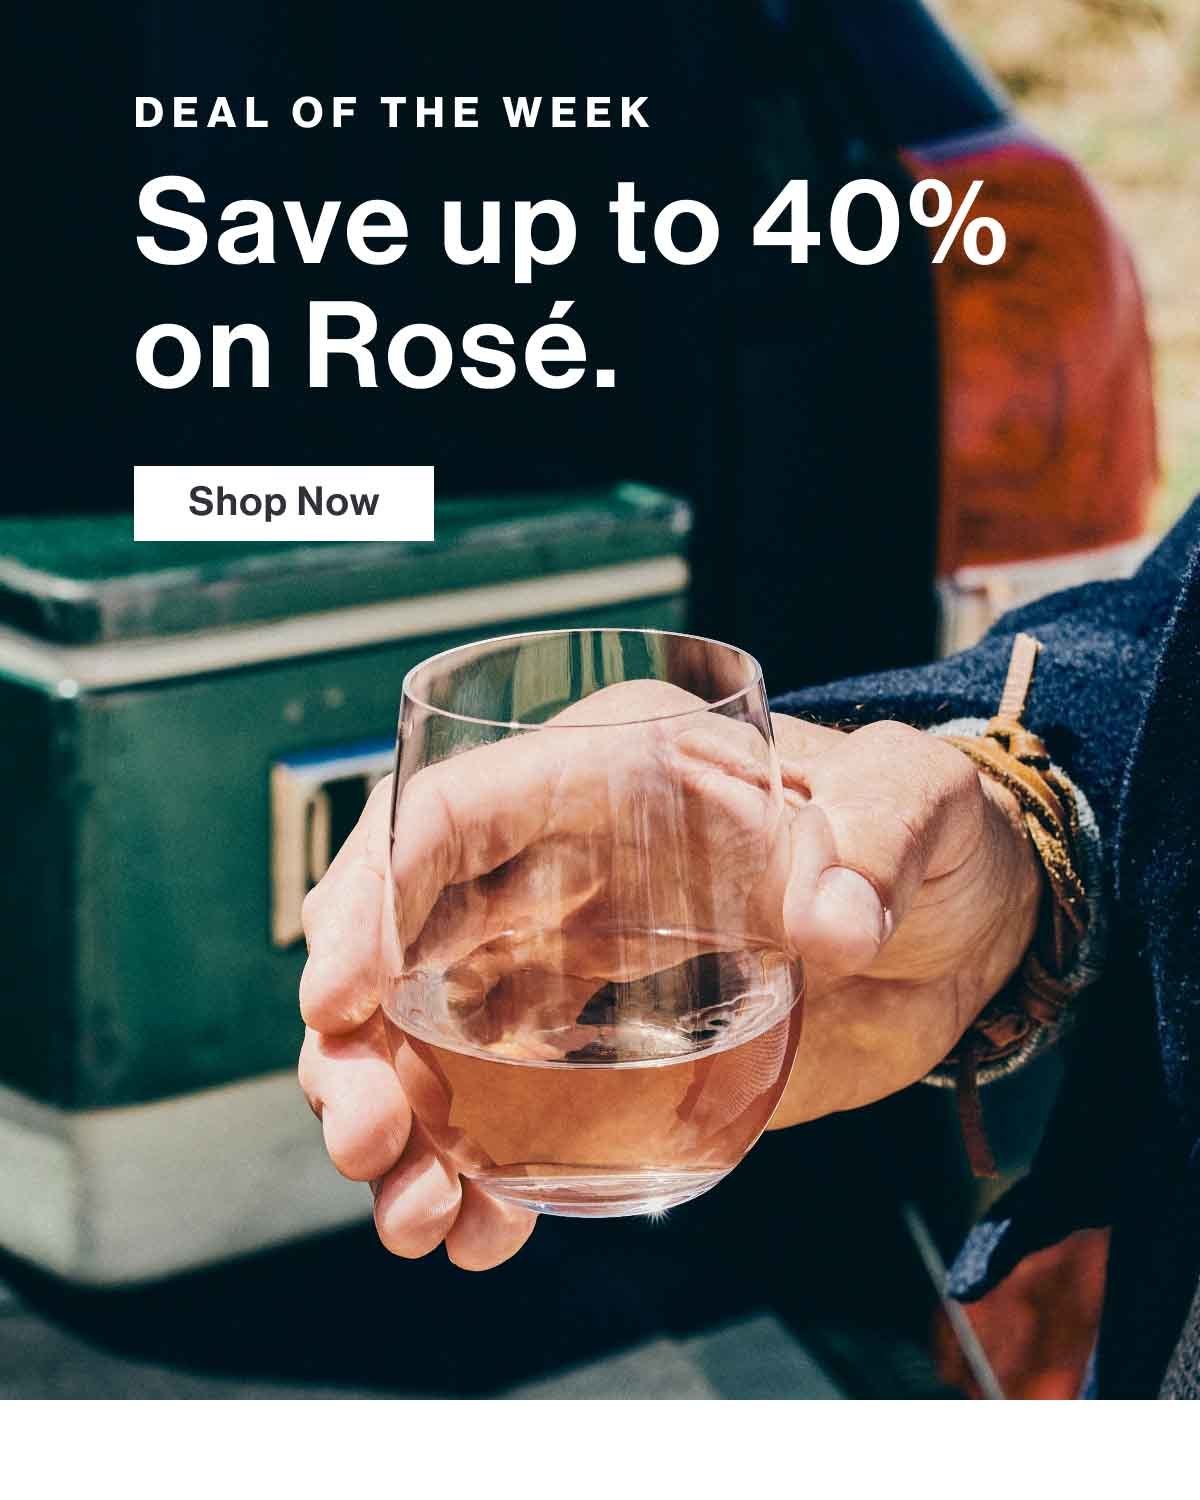 Save up to 40% on Rose